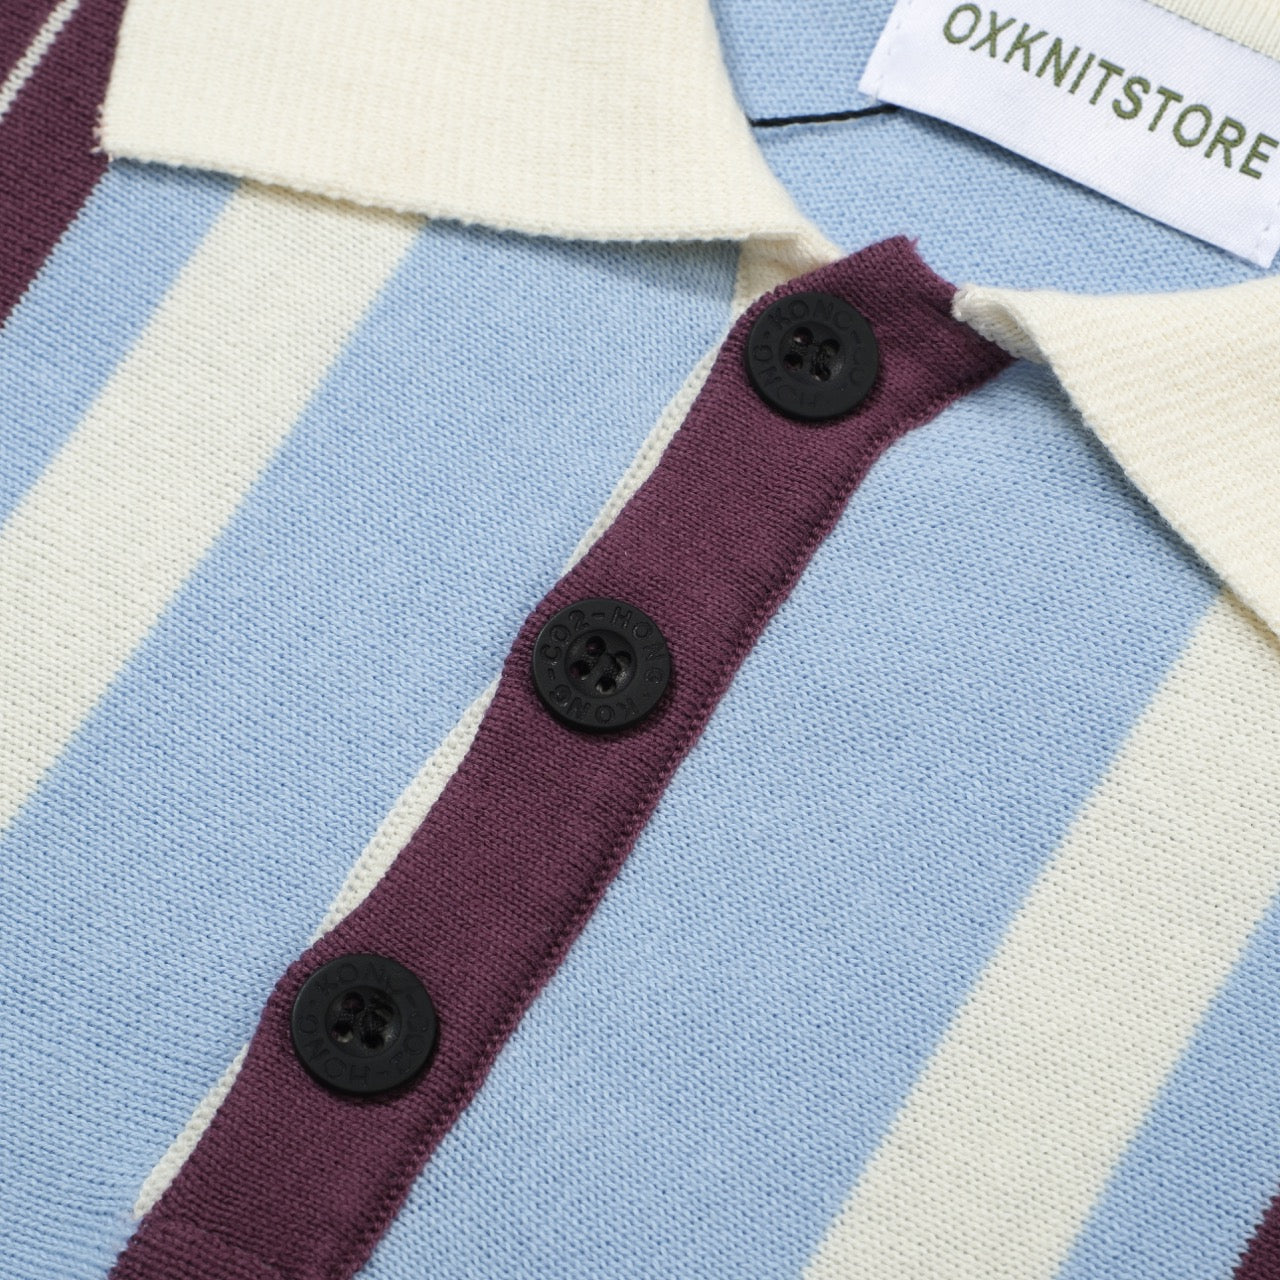 OXKNIT Men Vintage Clothing 1960s Mod Style Casual Stripe Blue Knitted Retro Polo Shirt